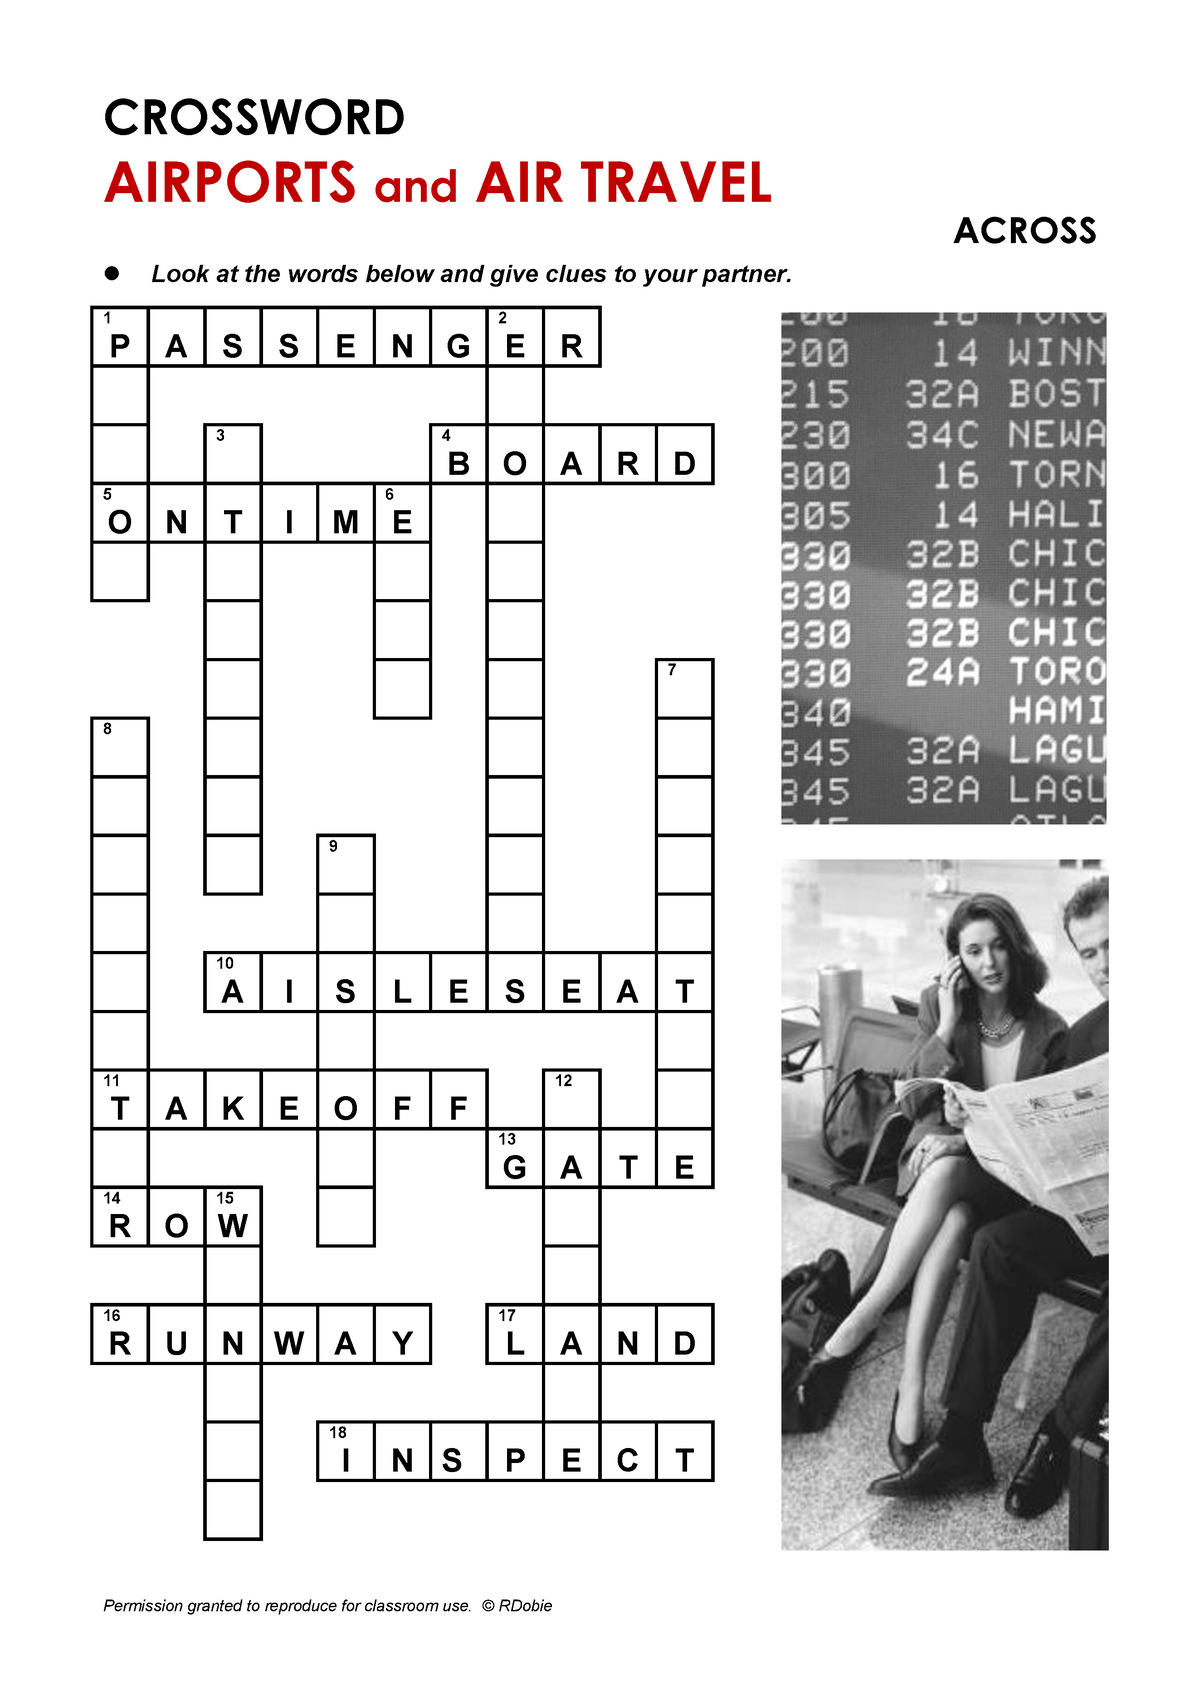 Crossword 1 airports Apuntes 1 CROSSWORD AIRPORTS and AIR TRAVEL